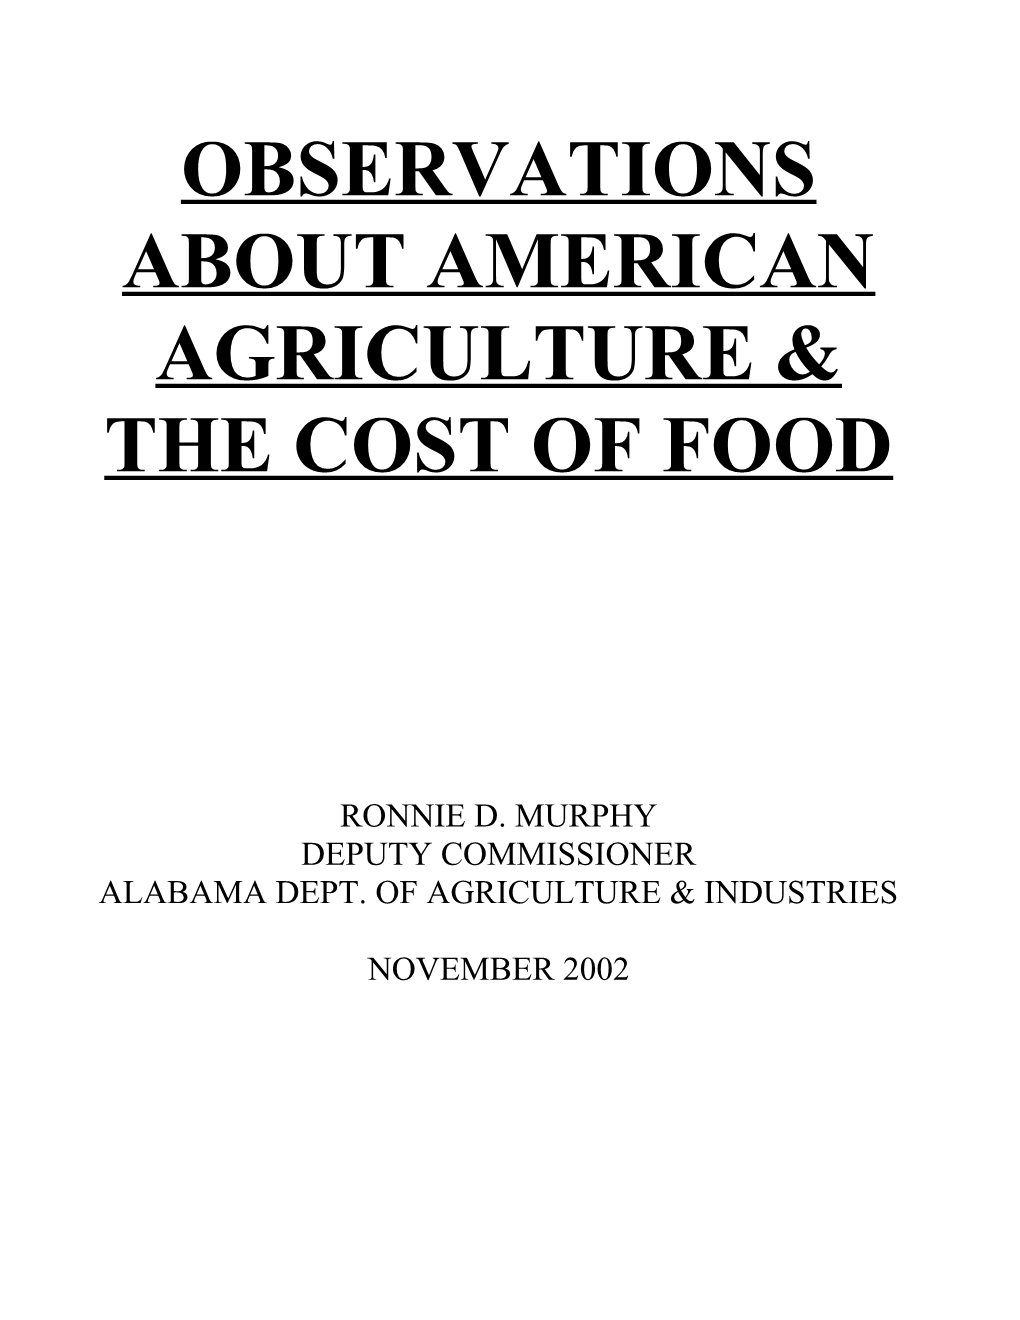 Observations About American Agriculture & the Cost of Food